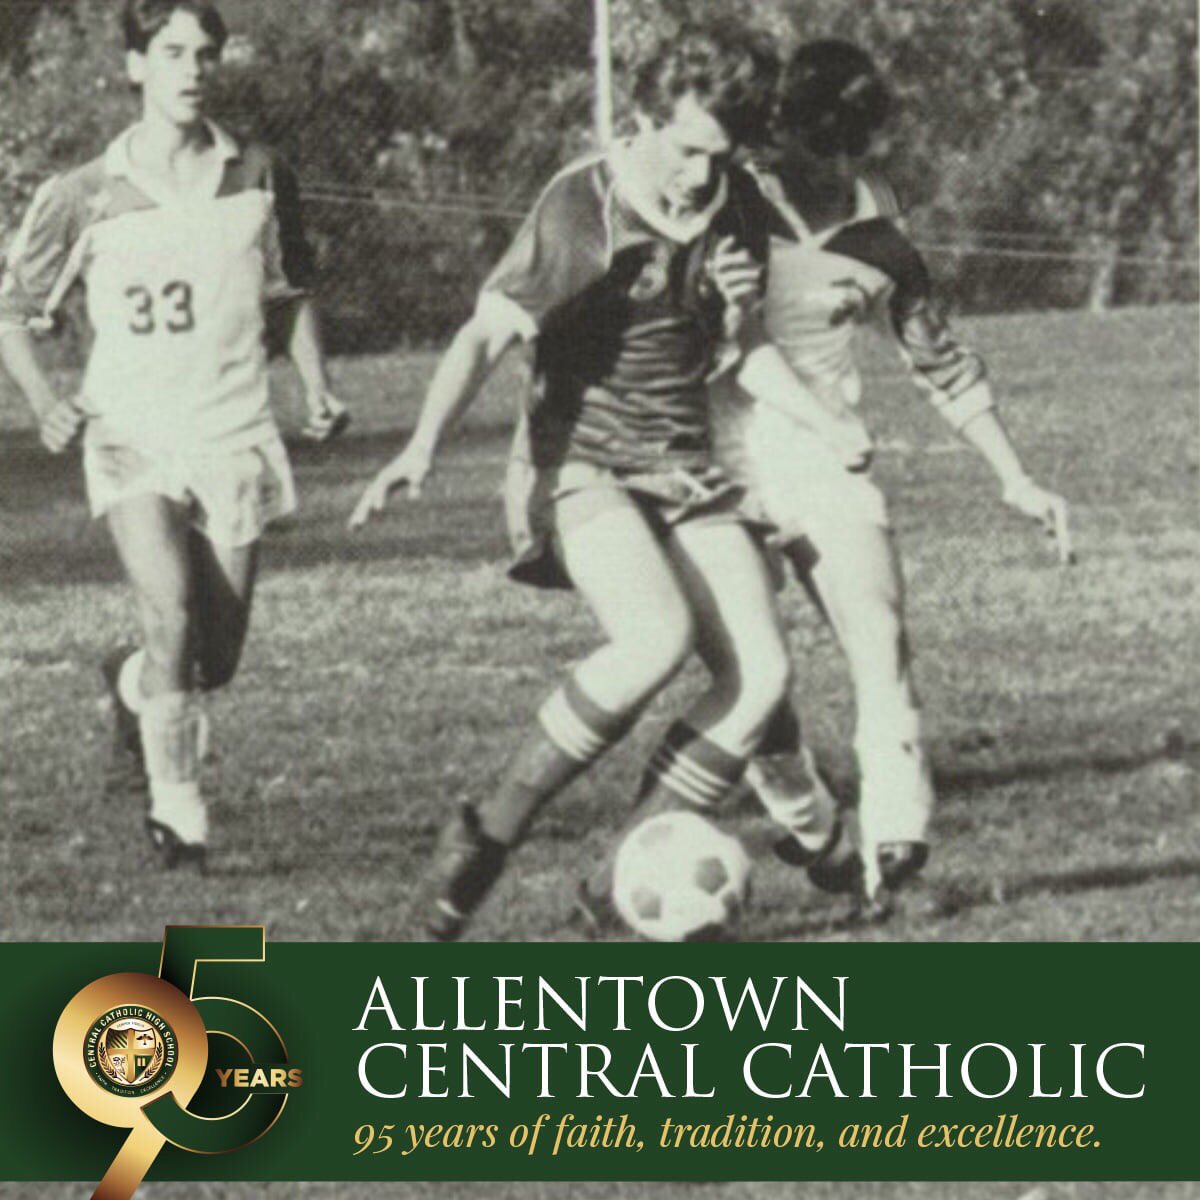 #ACCHSlegacy #73 — There was a new kick at Central in 1987 - the year our soccer program began! ACCHS had an outstanding first season and the drive to grow the program for future generations of Vikings and Vikettes! #95thAnniversary #OurVikingNation 💚💛⚽️ @ACCHS_Athletics